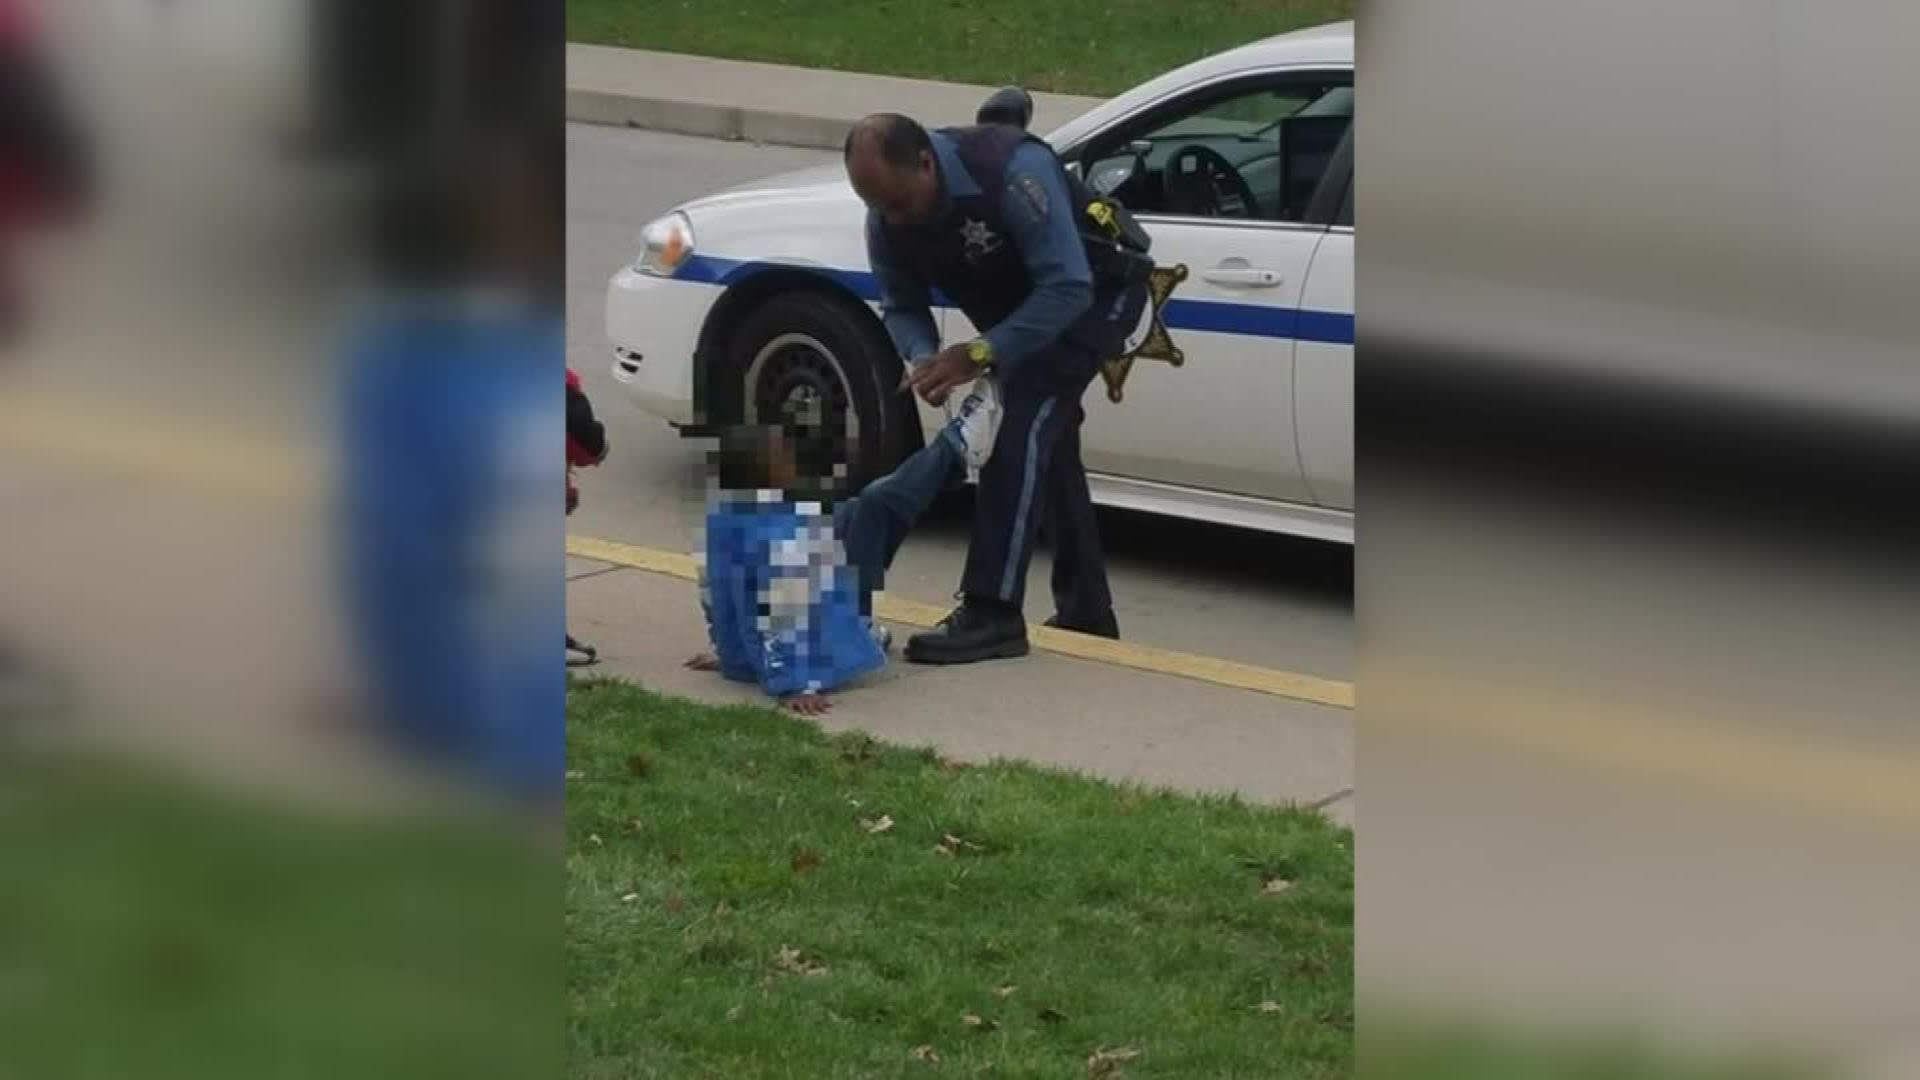 Photo of police officer tying boy's shoe goes viral | CNN